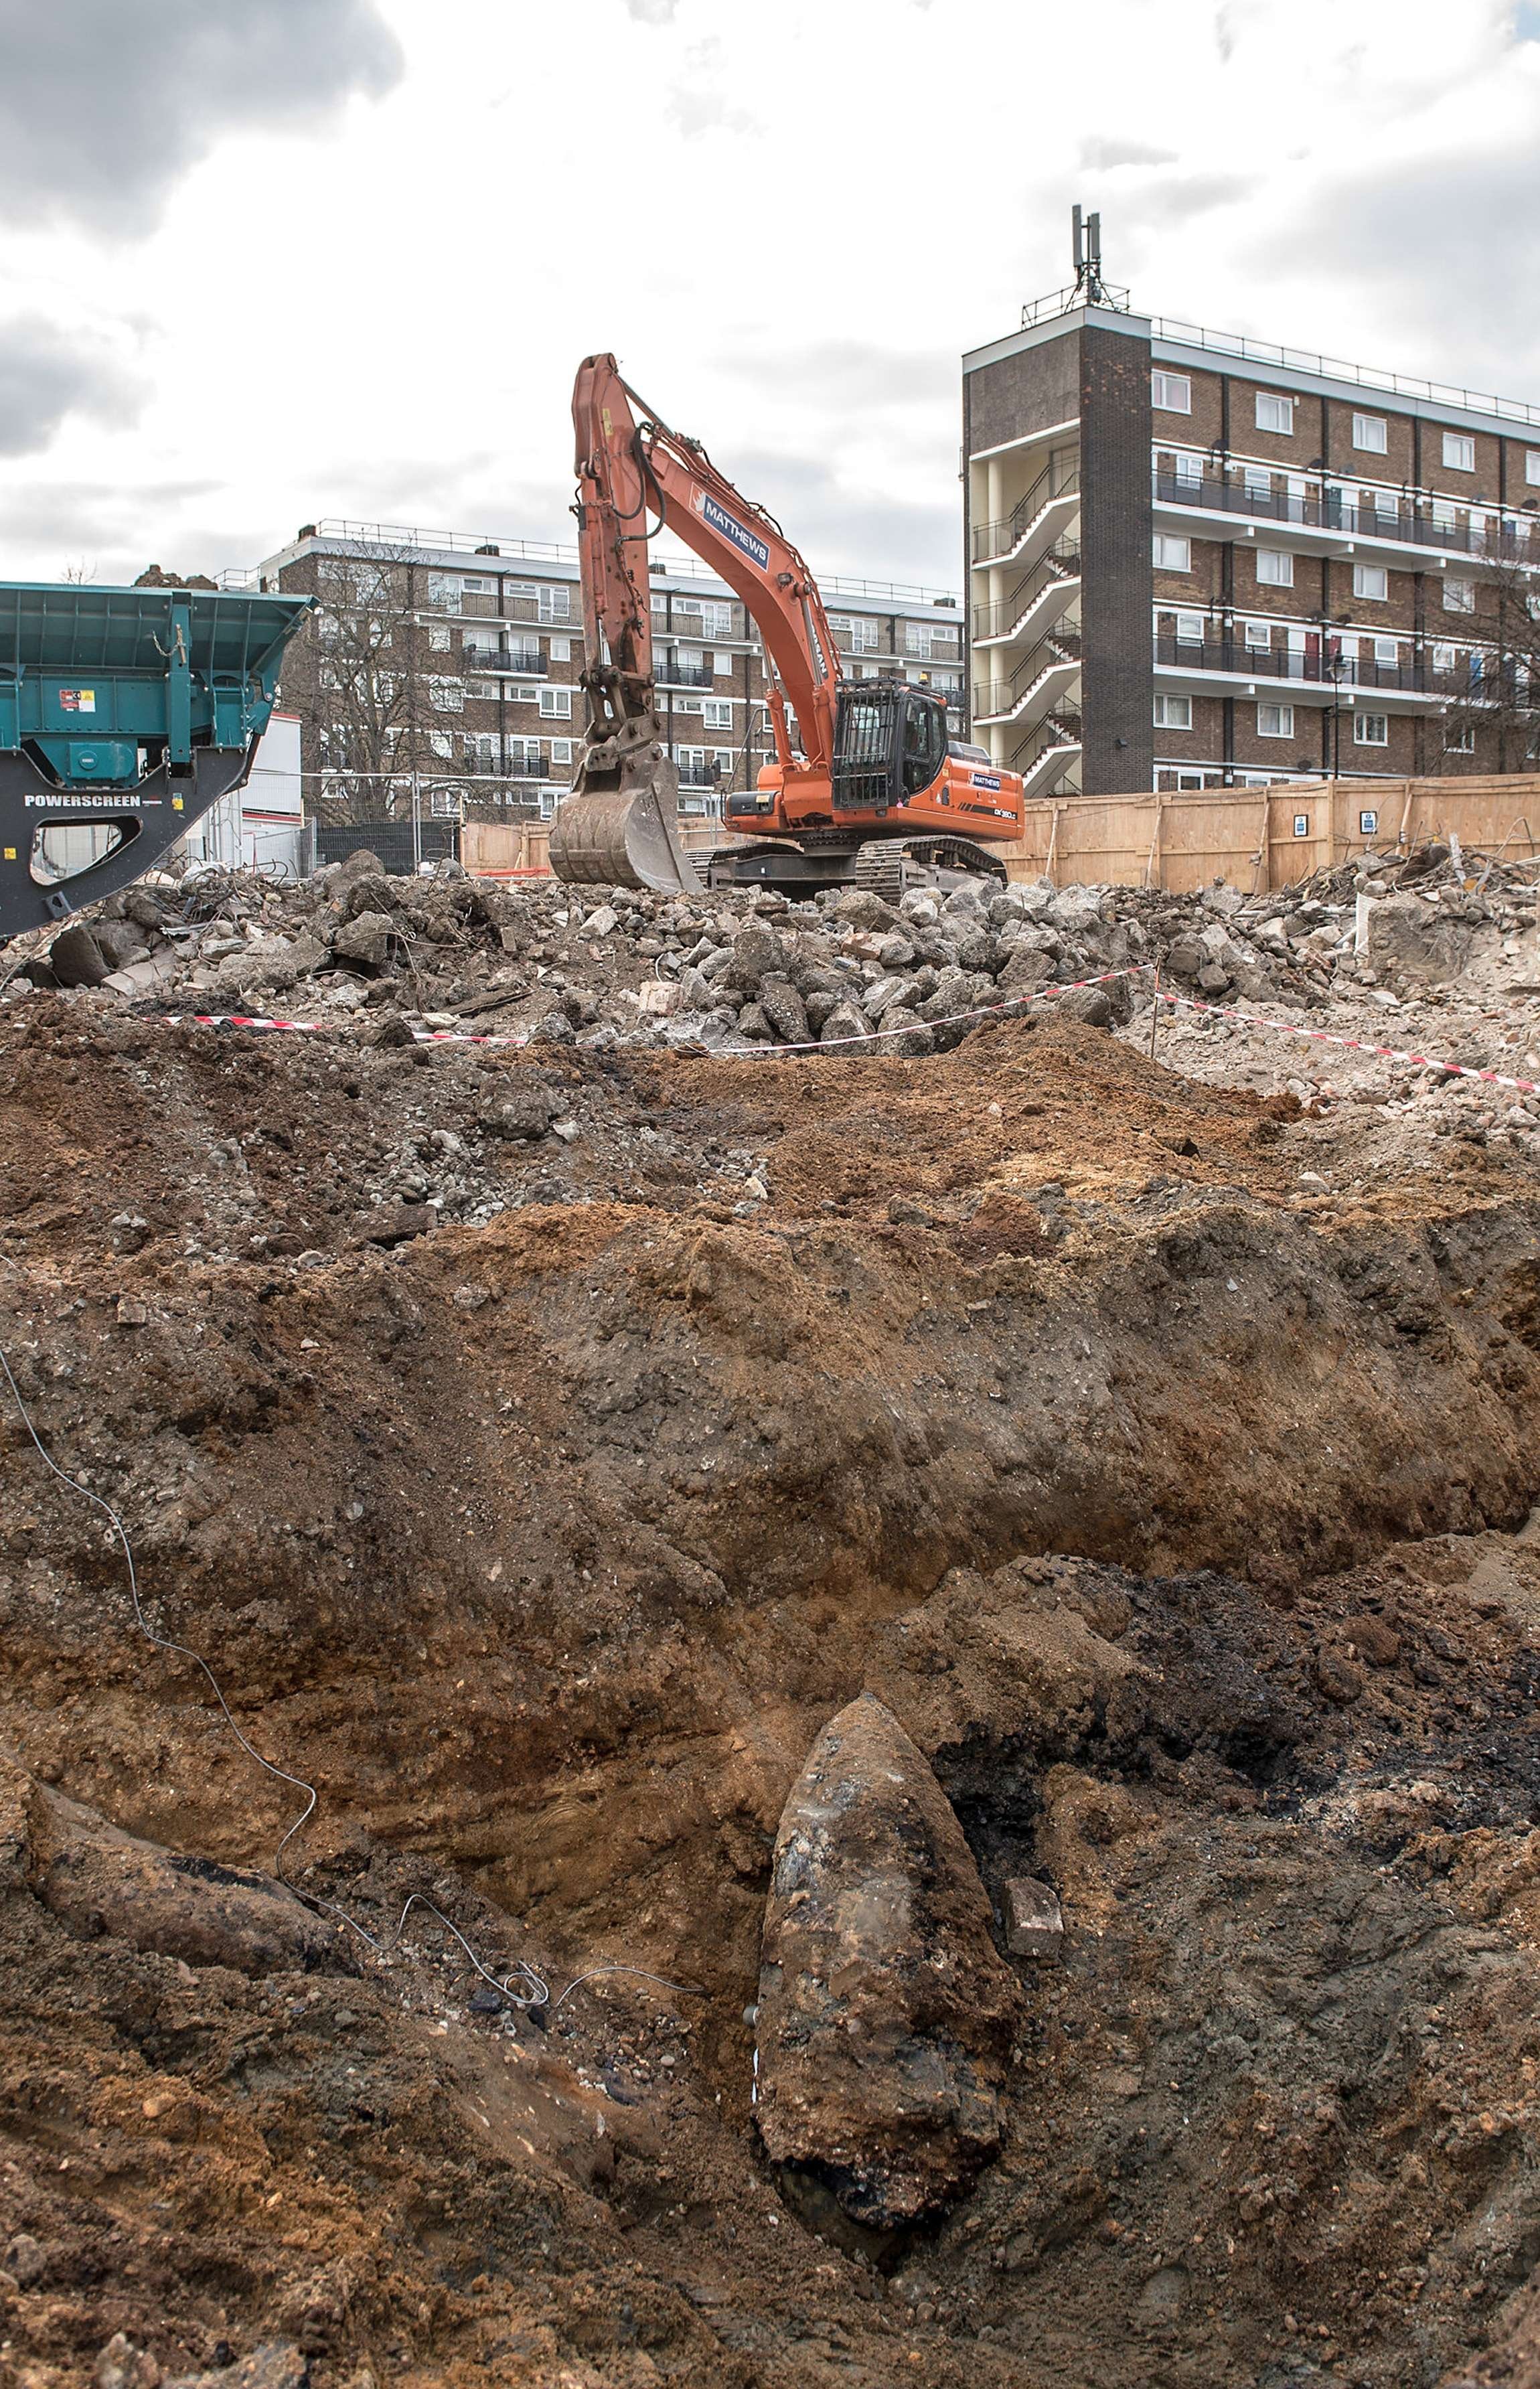 An unexploded 1,000-pound bomb discovered at a building site in south London, on March 23, 2015. (Sergeant Rupert Frere—Britain's Ministry of Defence/AFP/Getty Images)